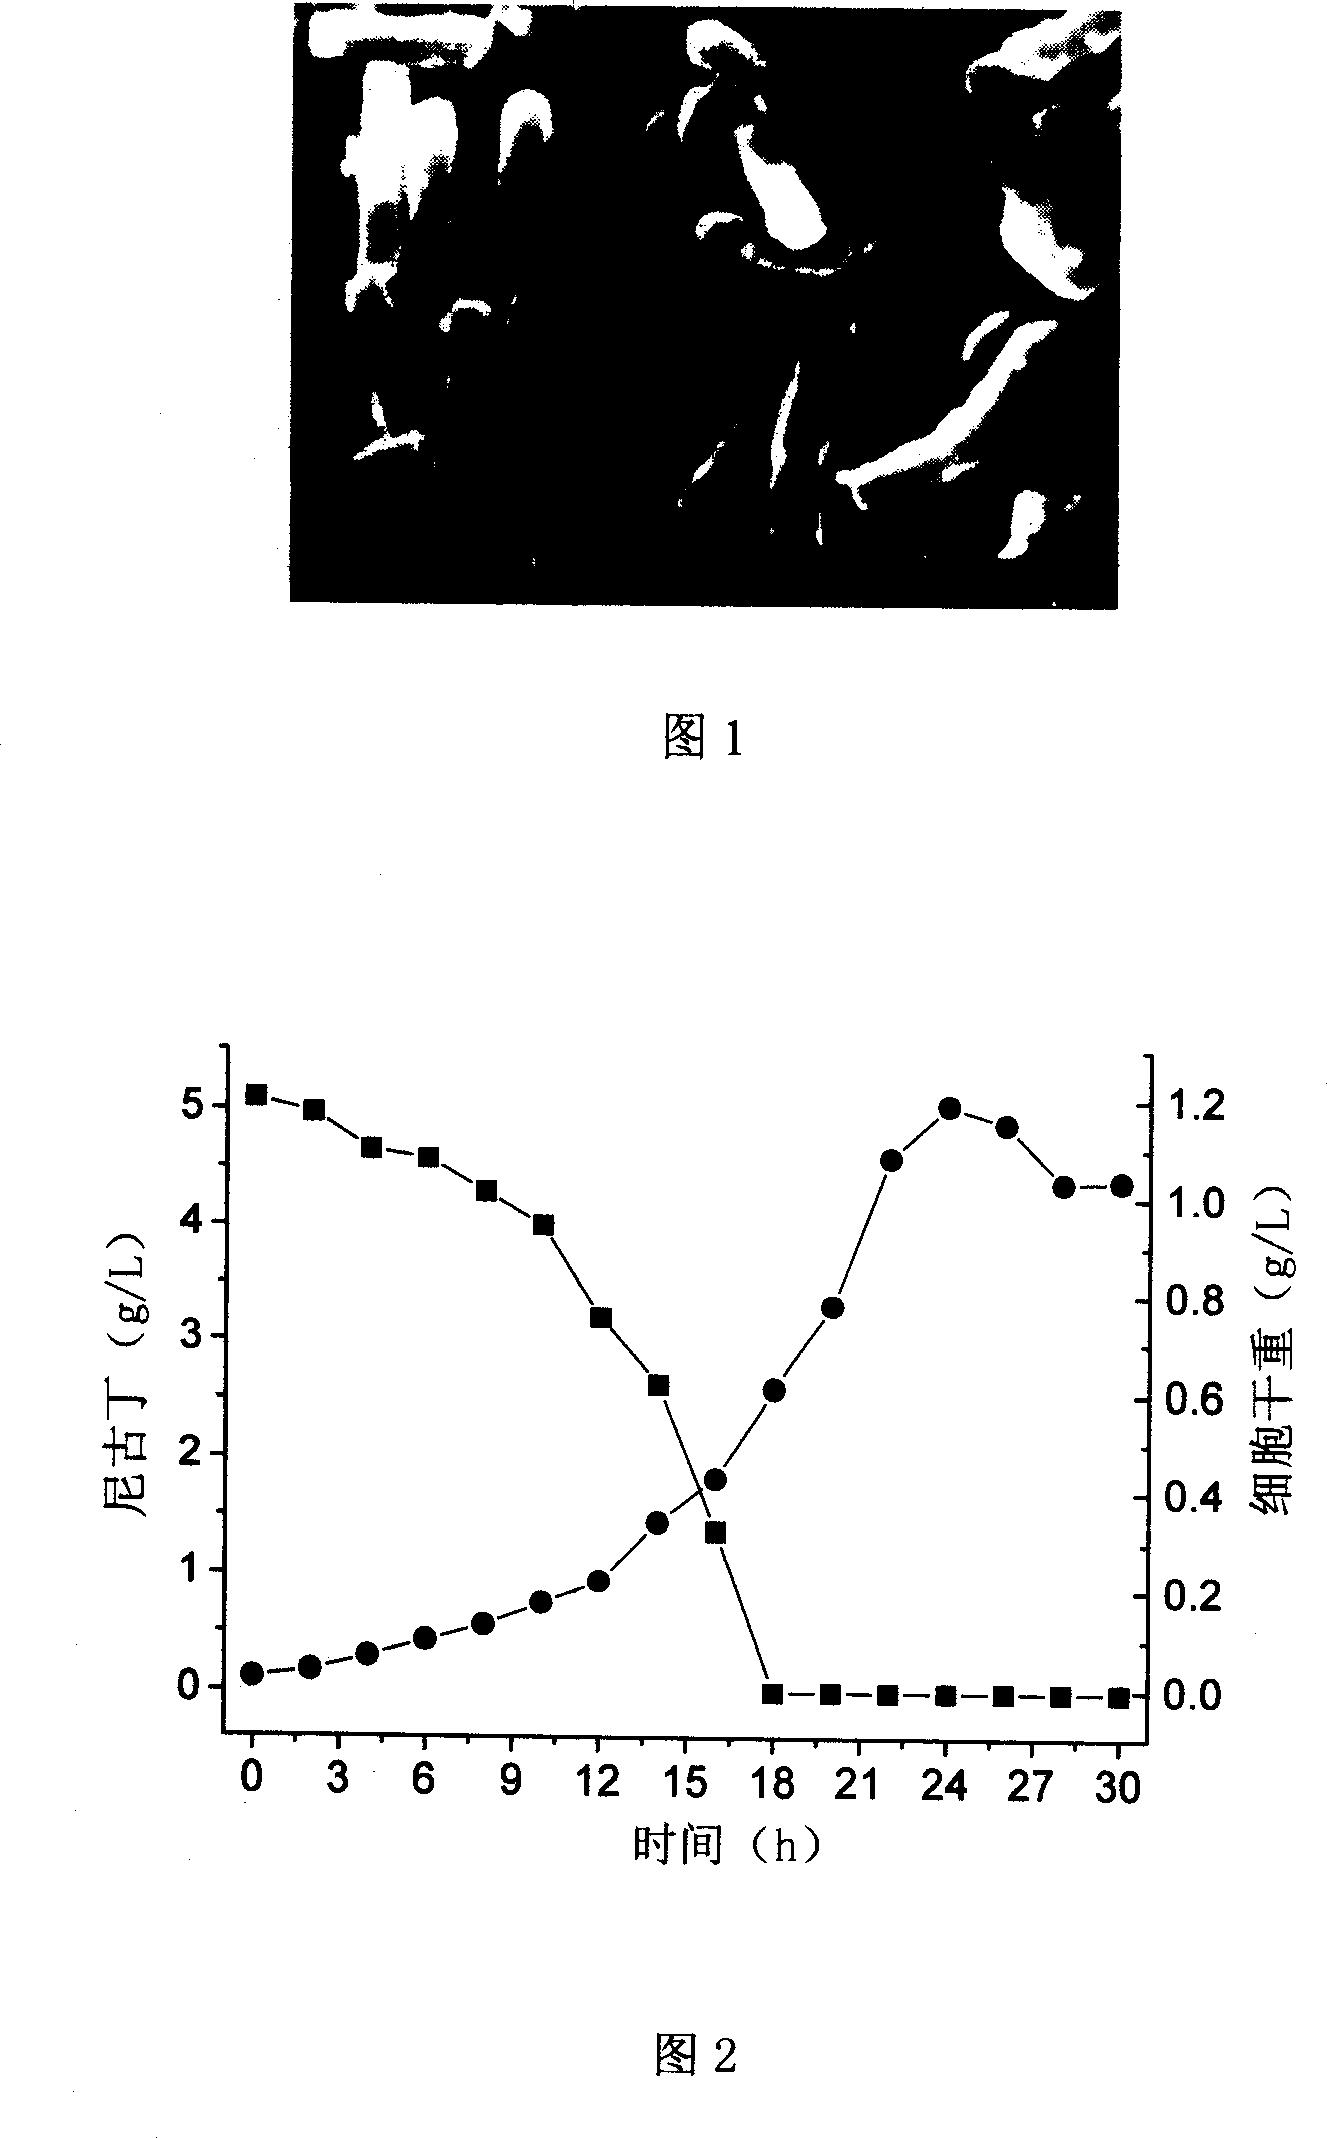 Agrobacterium tumefaciens capable of metabolizing nicotine and application thereof